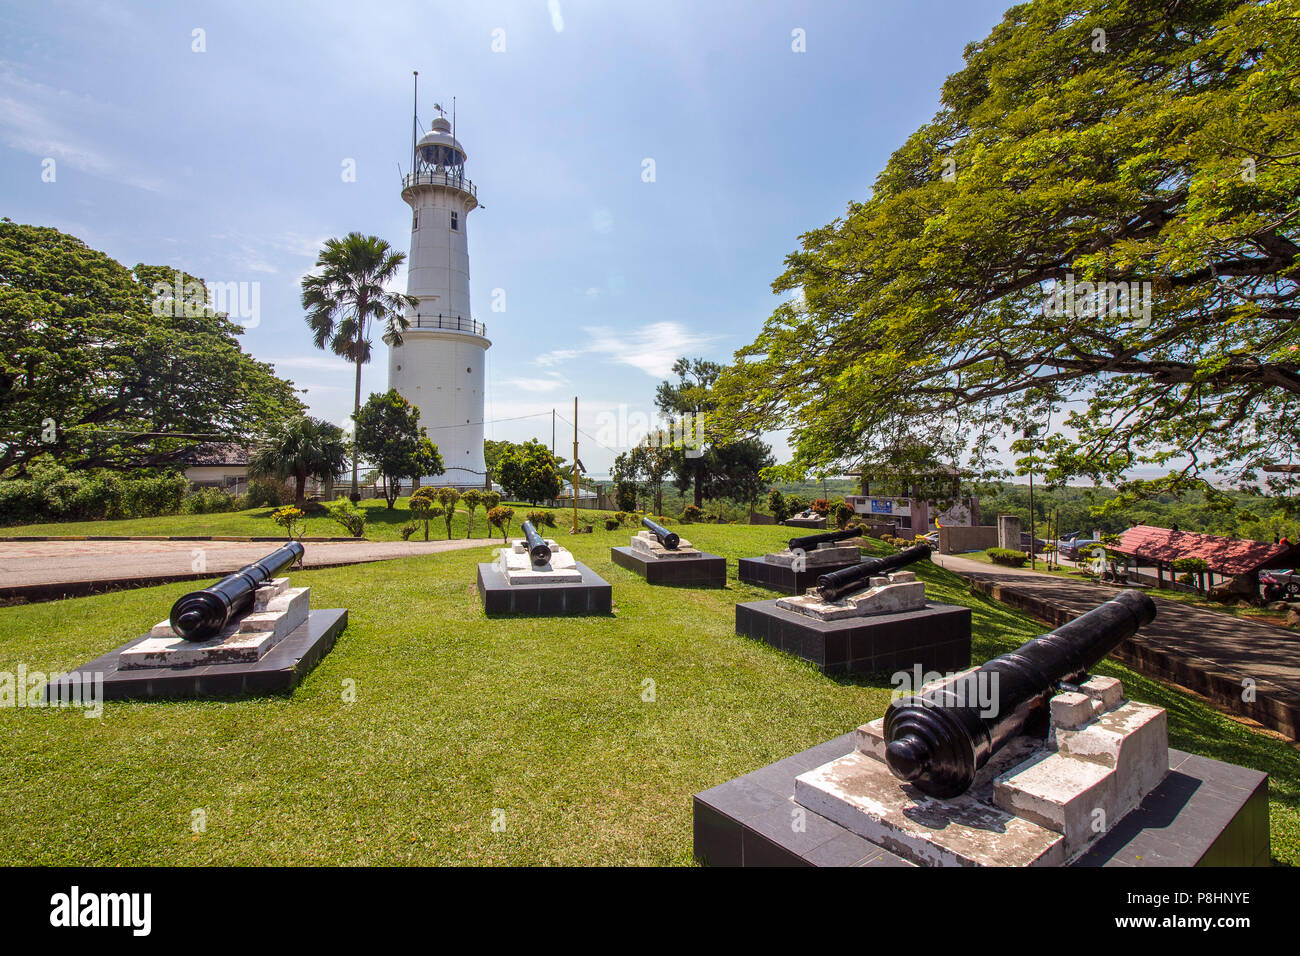 Altingsburg Lighthouse and cannons located at Melawati Hill, Kuala Selangor, Malaysia, it was built in 1907 and used extensively during the British co Stock Photo